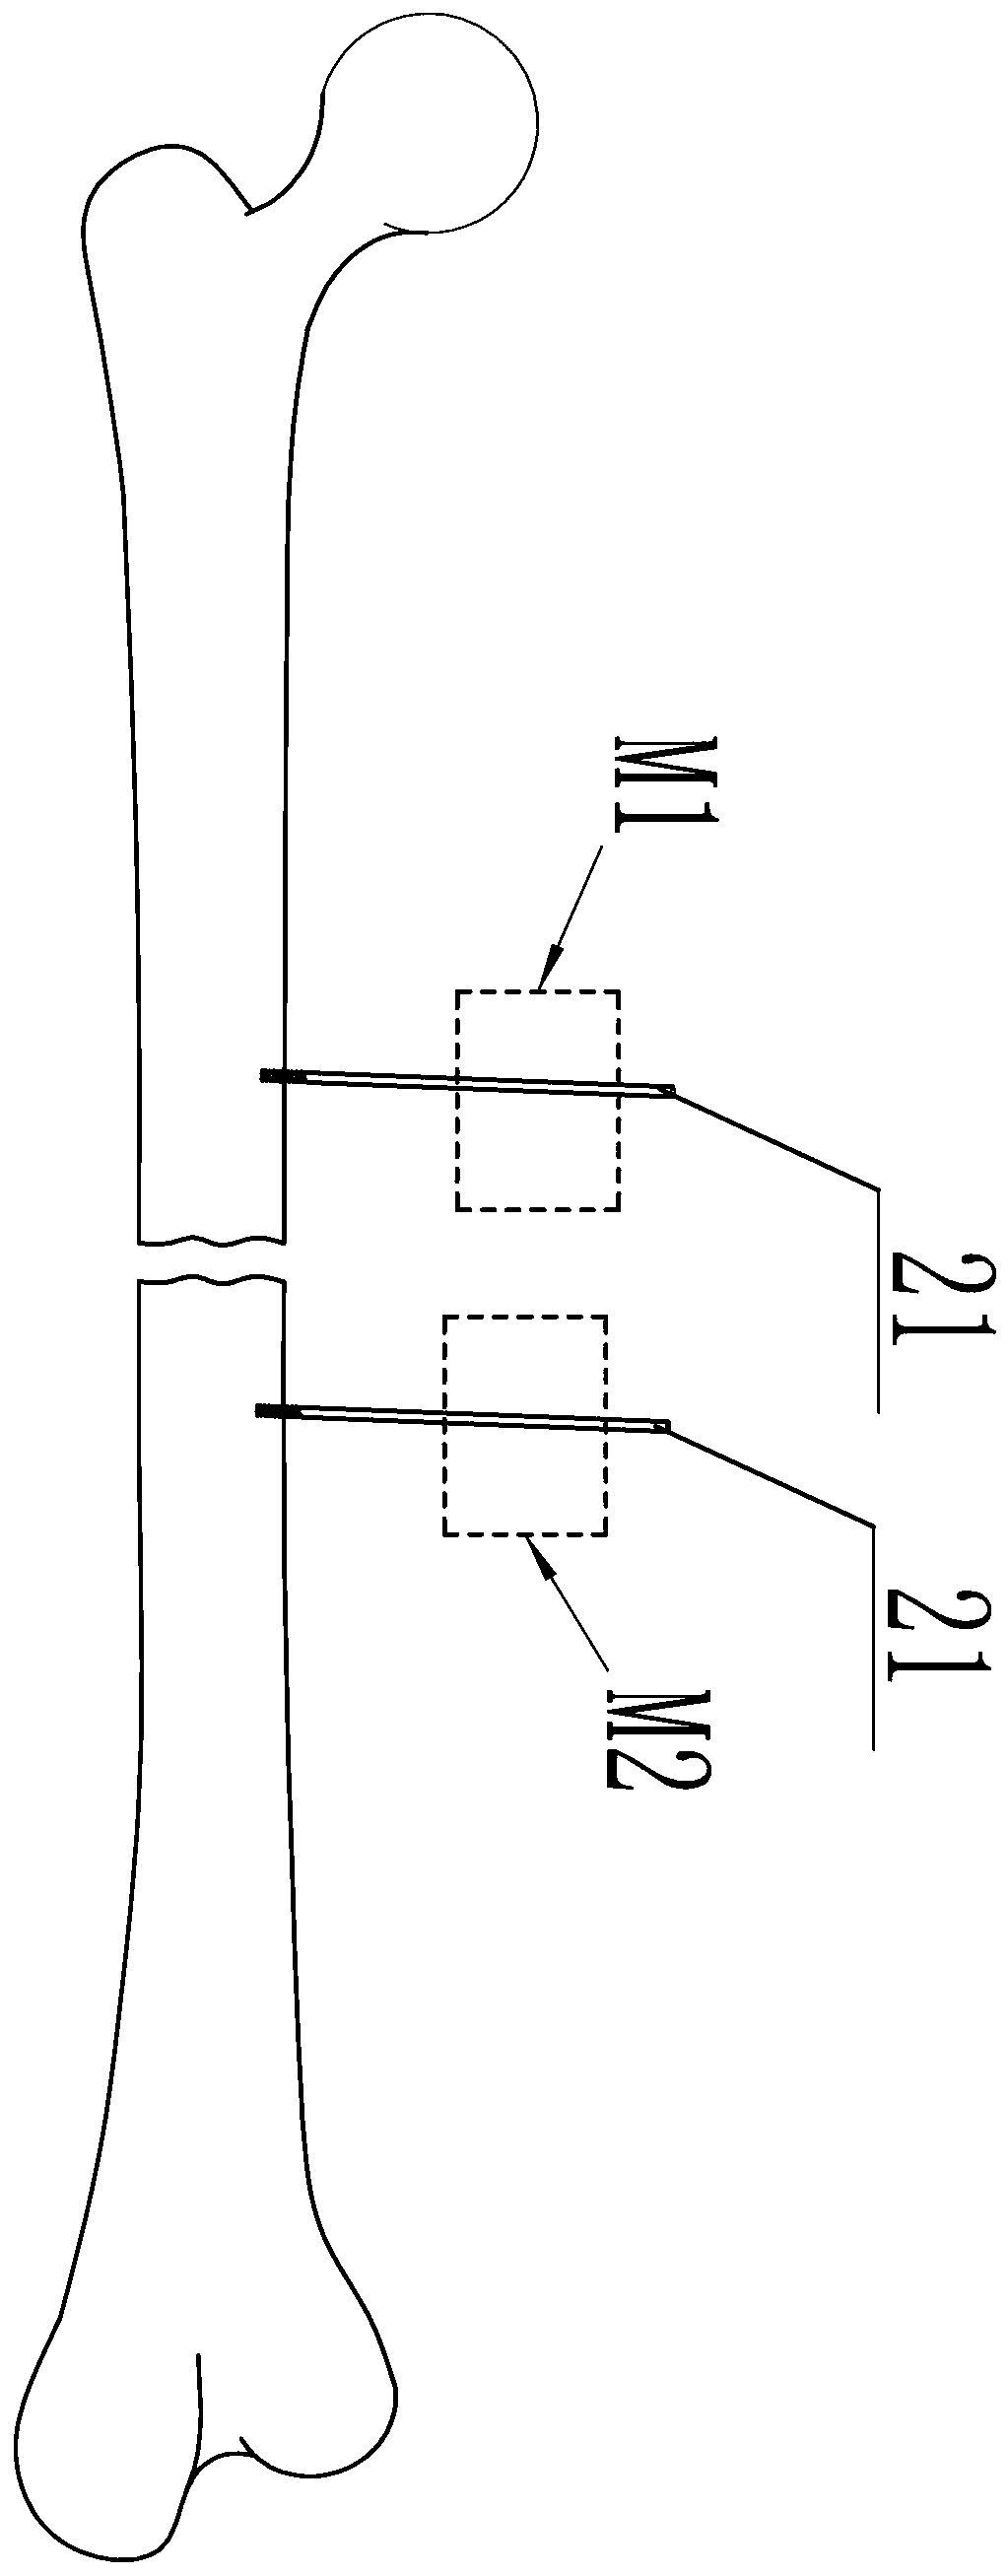 Fracture tractive reduction device